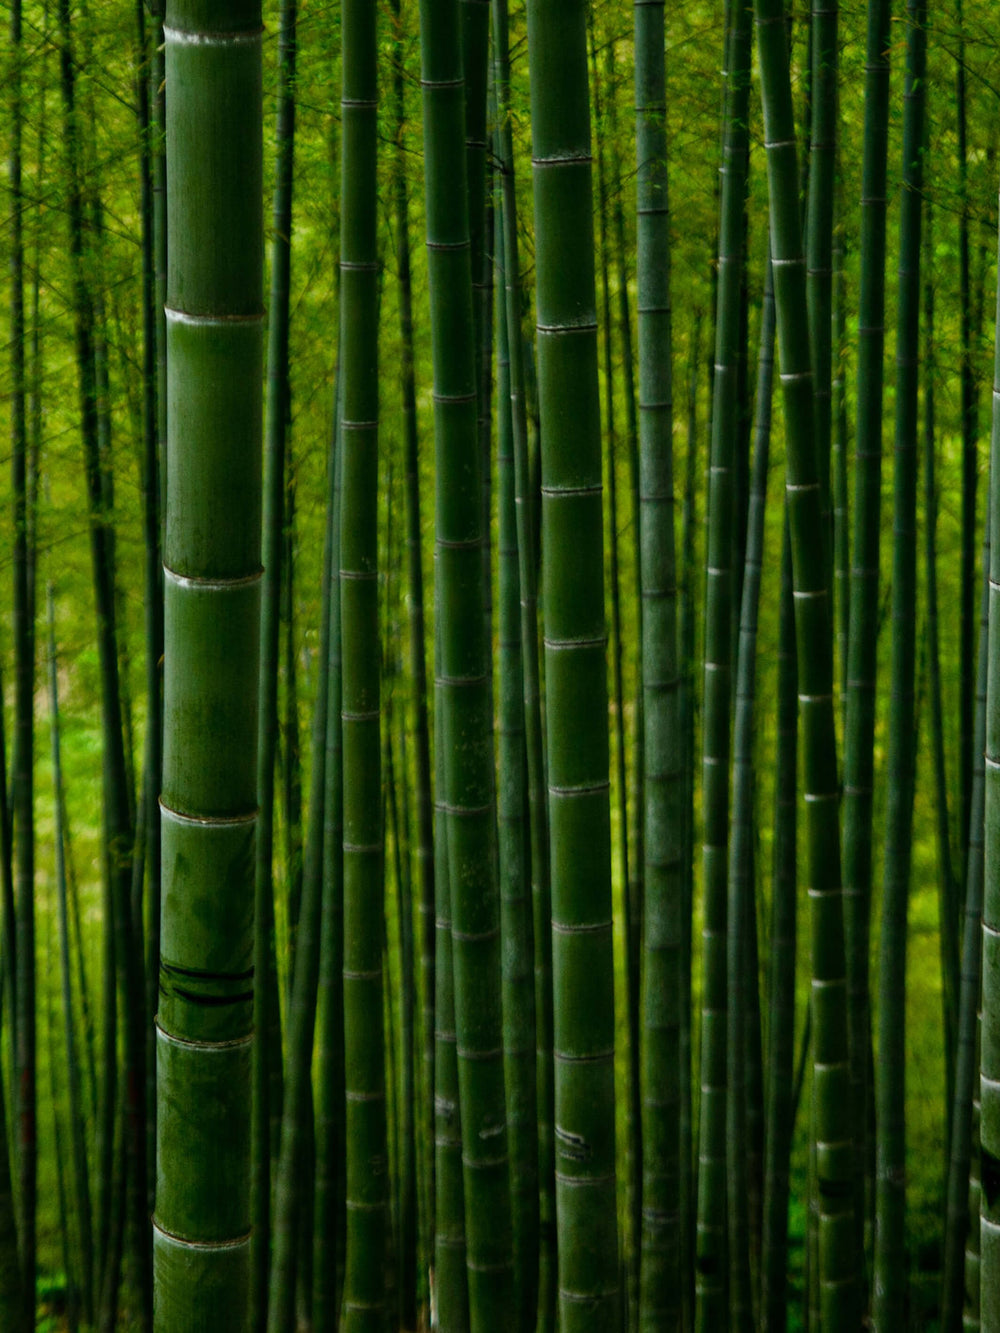 This is a picture of a bamboo forest that inspired the colors and textures of the Bamboo Herringbone Earrings.